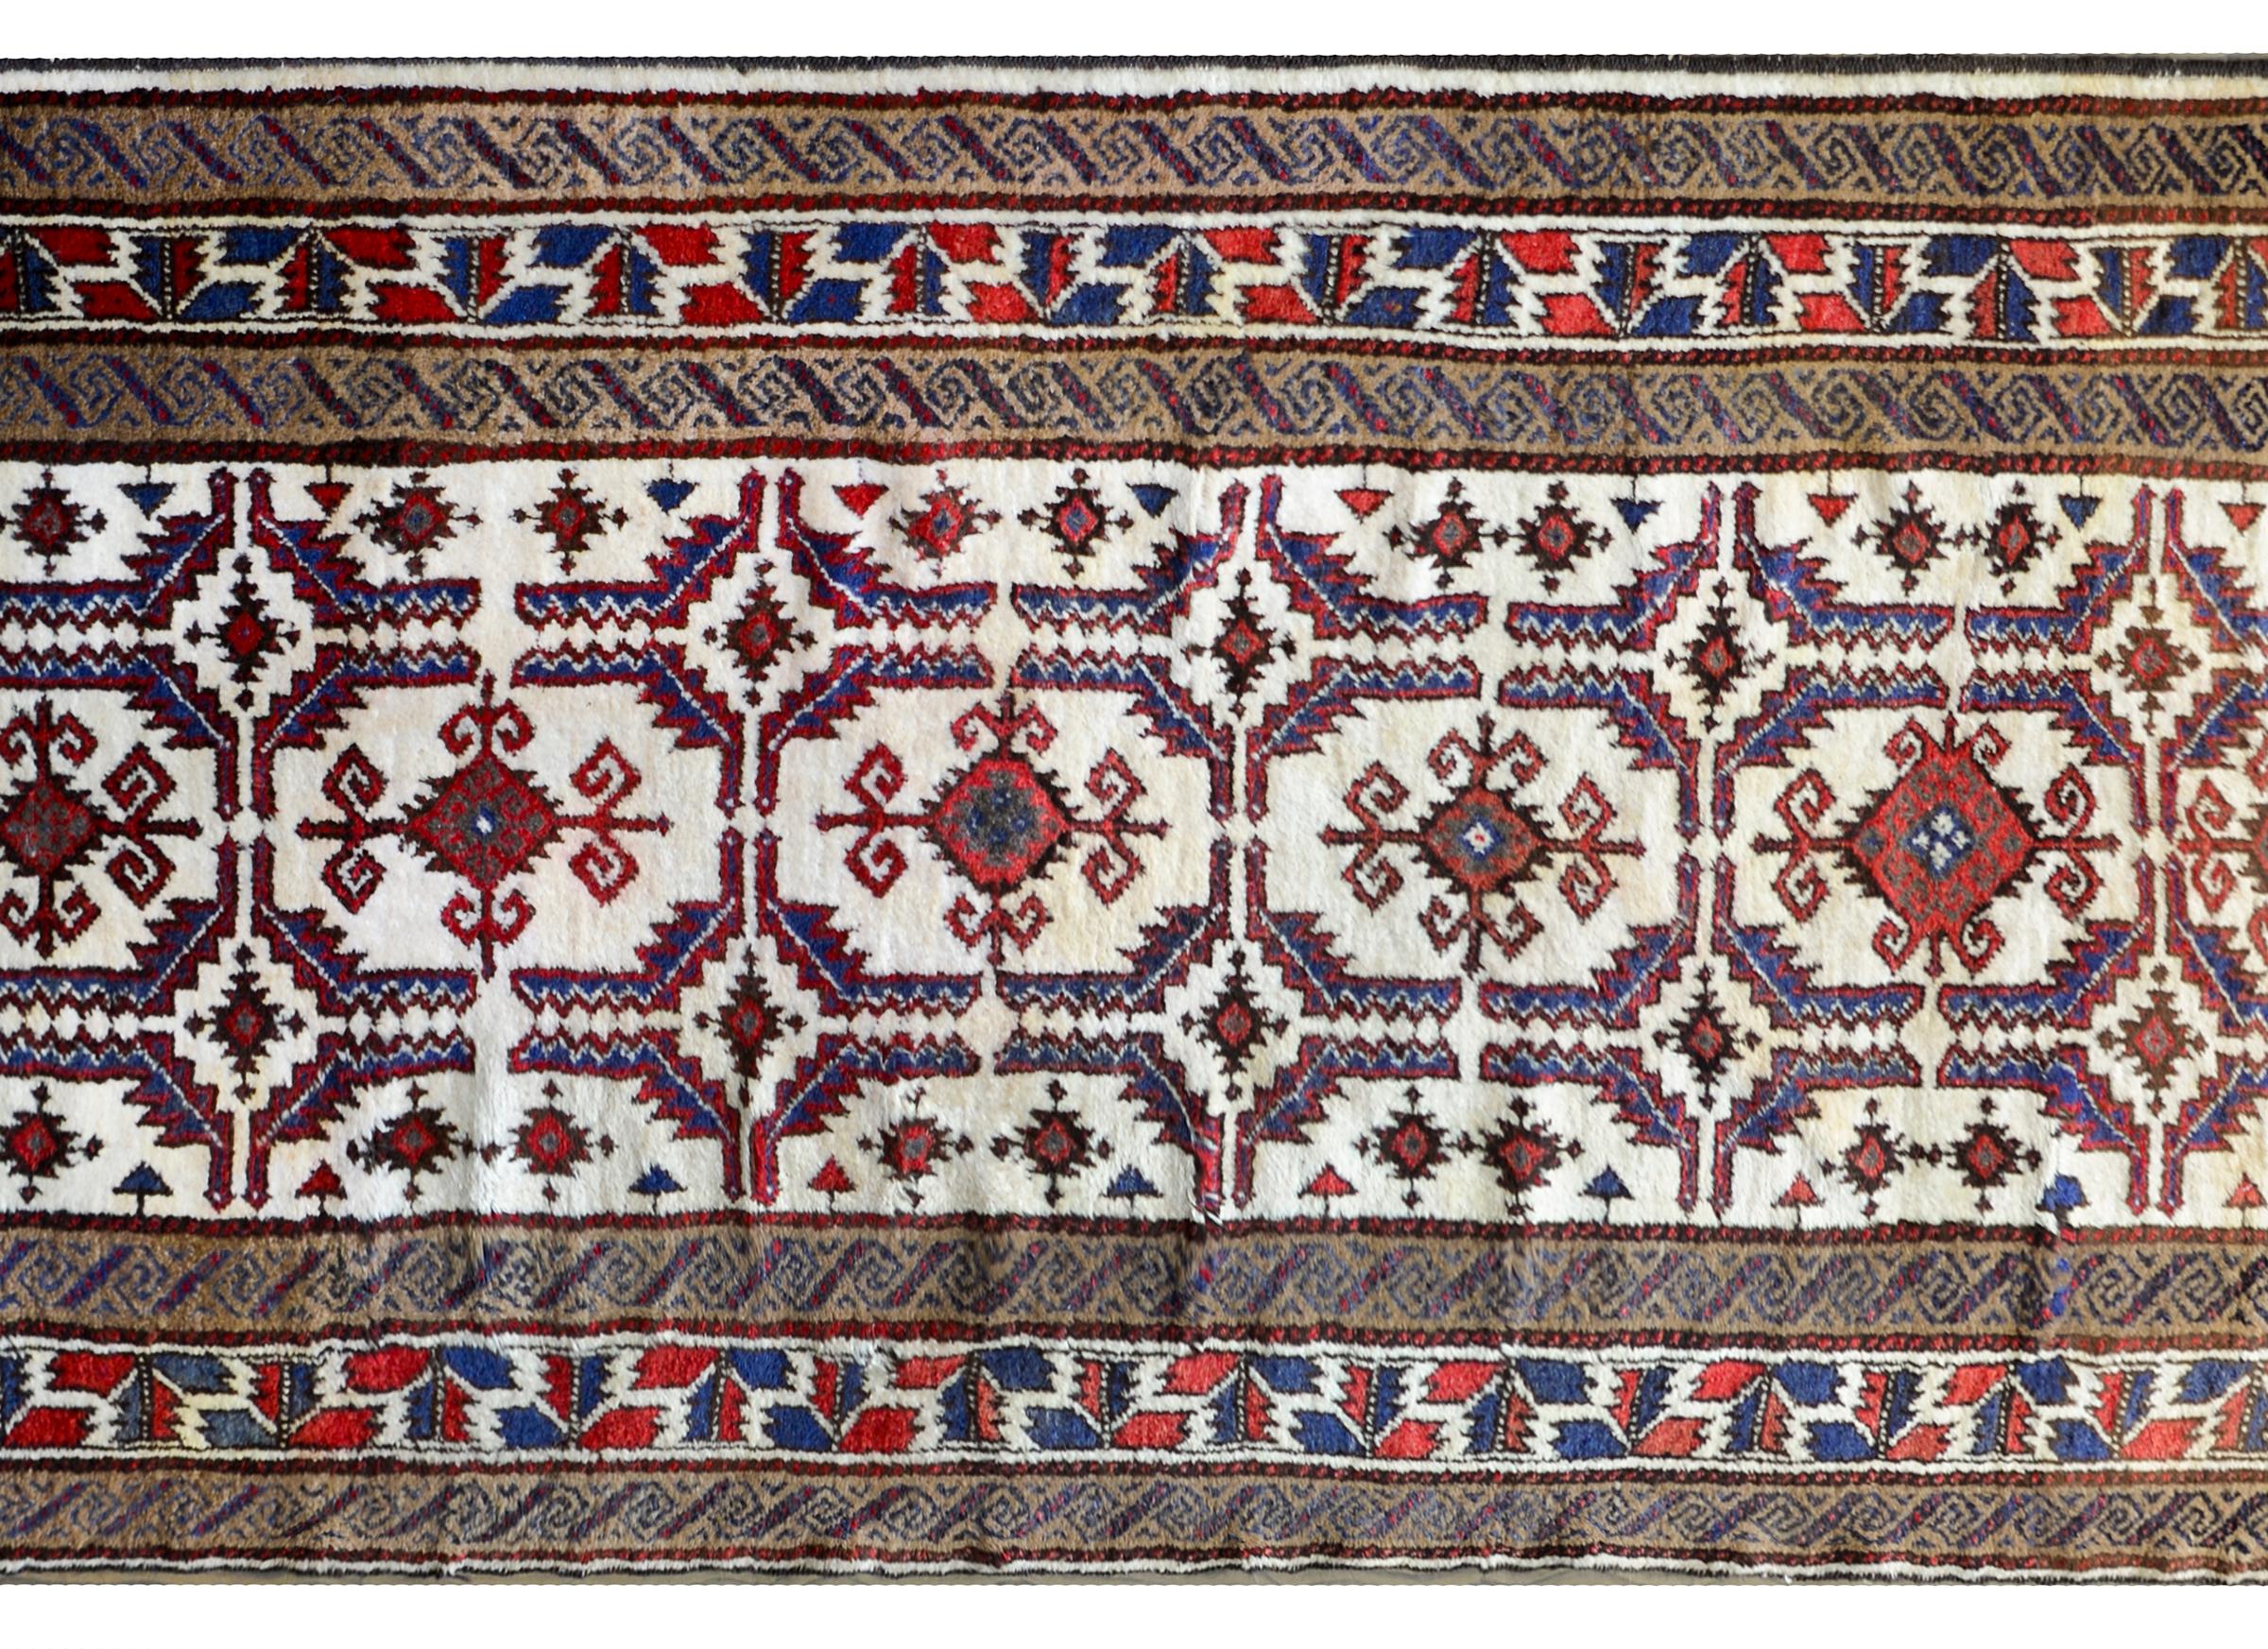 A beautiful vintage Persian Lori runner with a wonderful stylized floral pattern woven in crimson, indigo, and brown against a natural undyed wool background. The border is fantastic composed with three bold geometric tribal patterns woven in